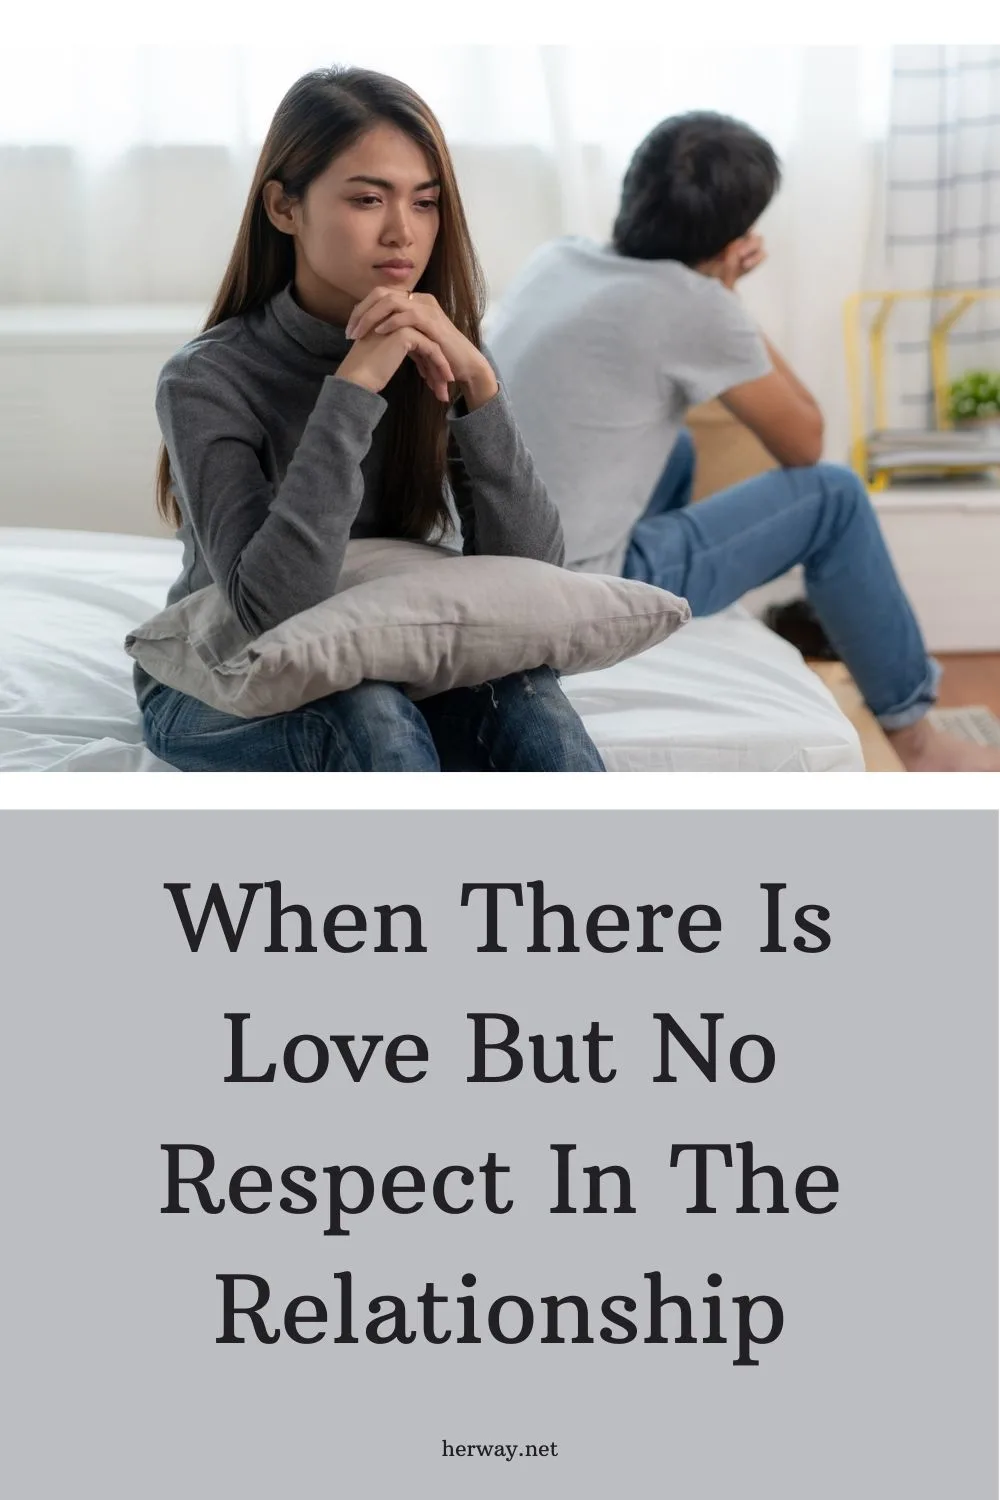 When There Is Love But No Respect In The Relationship